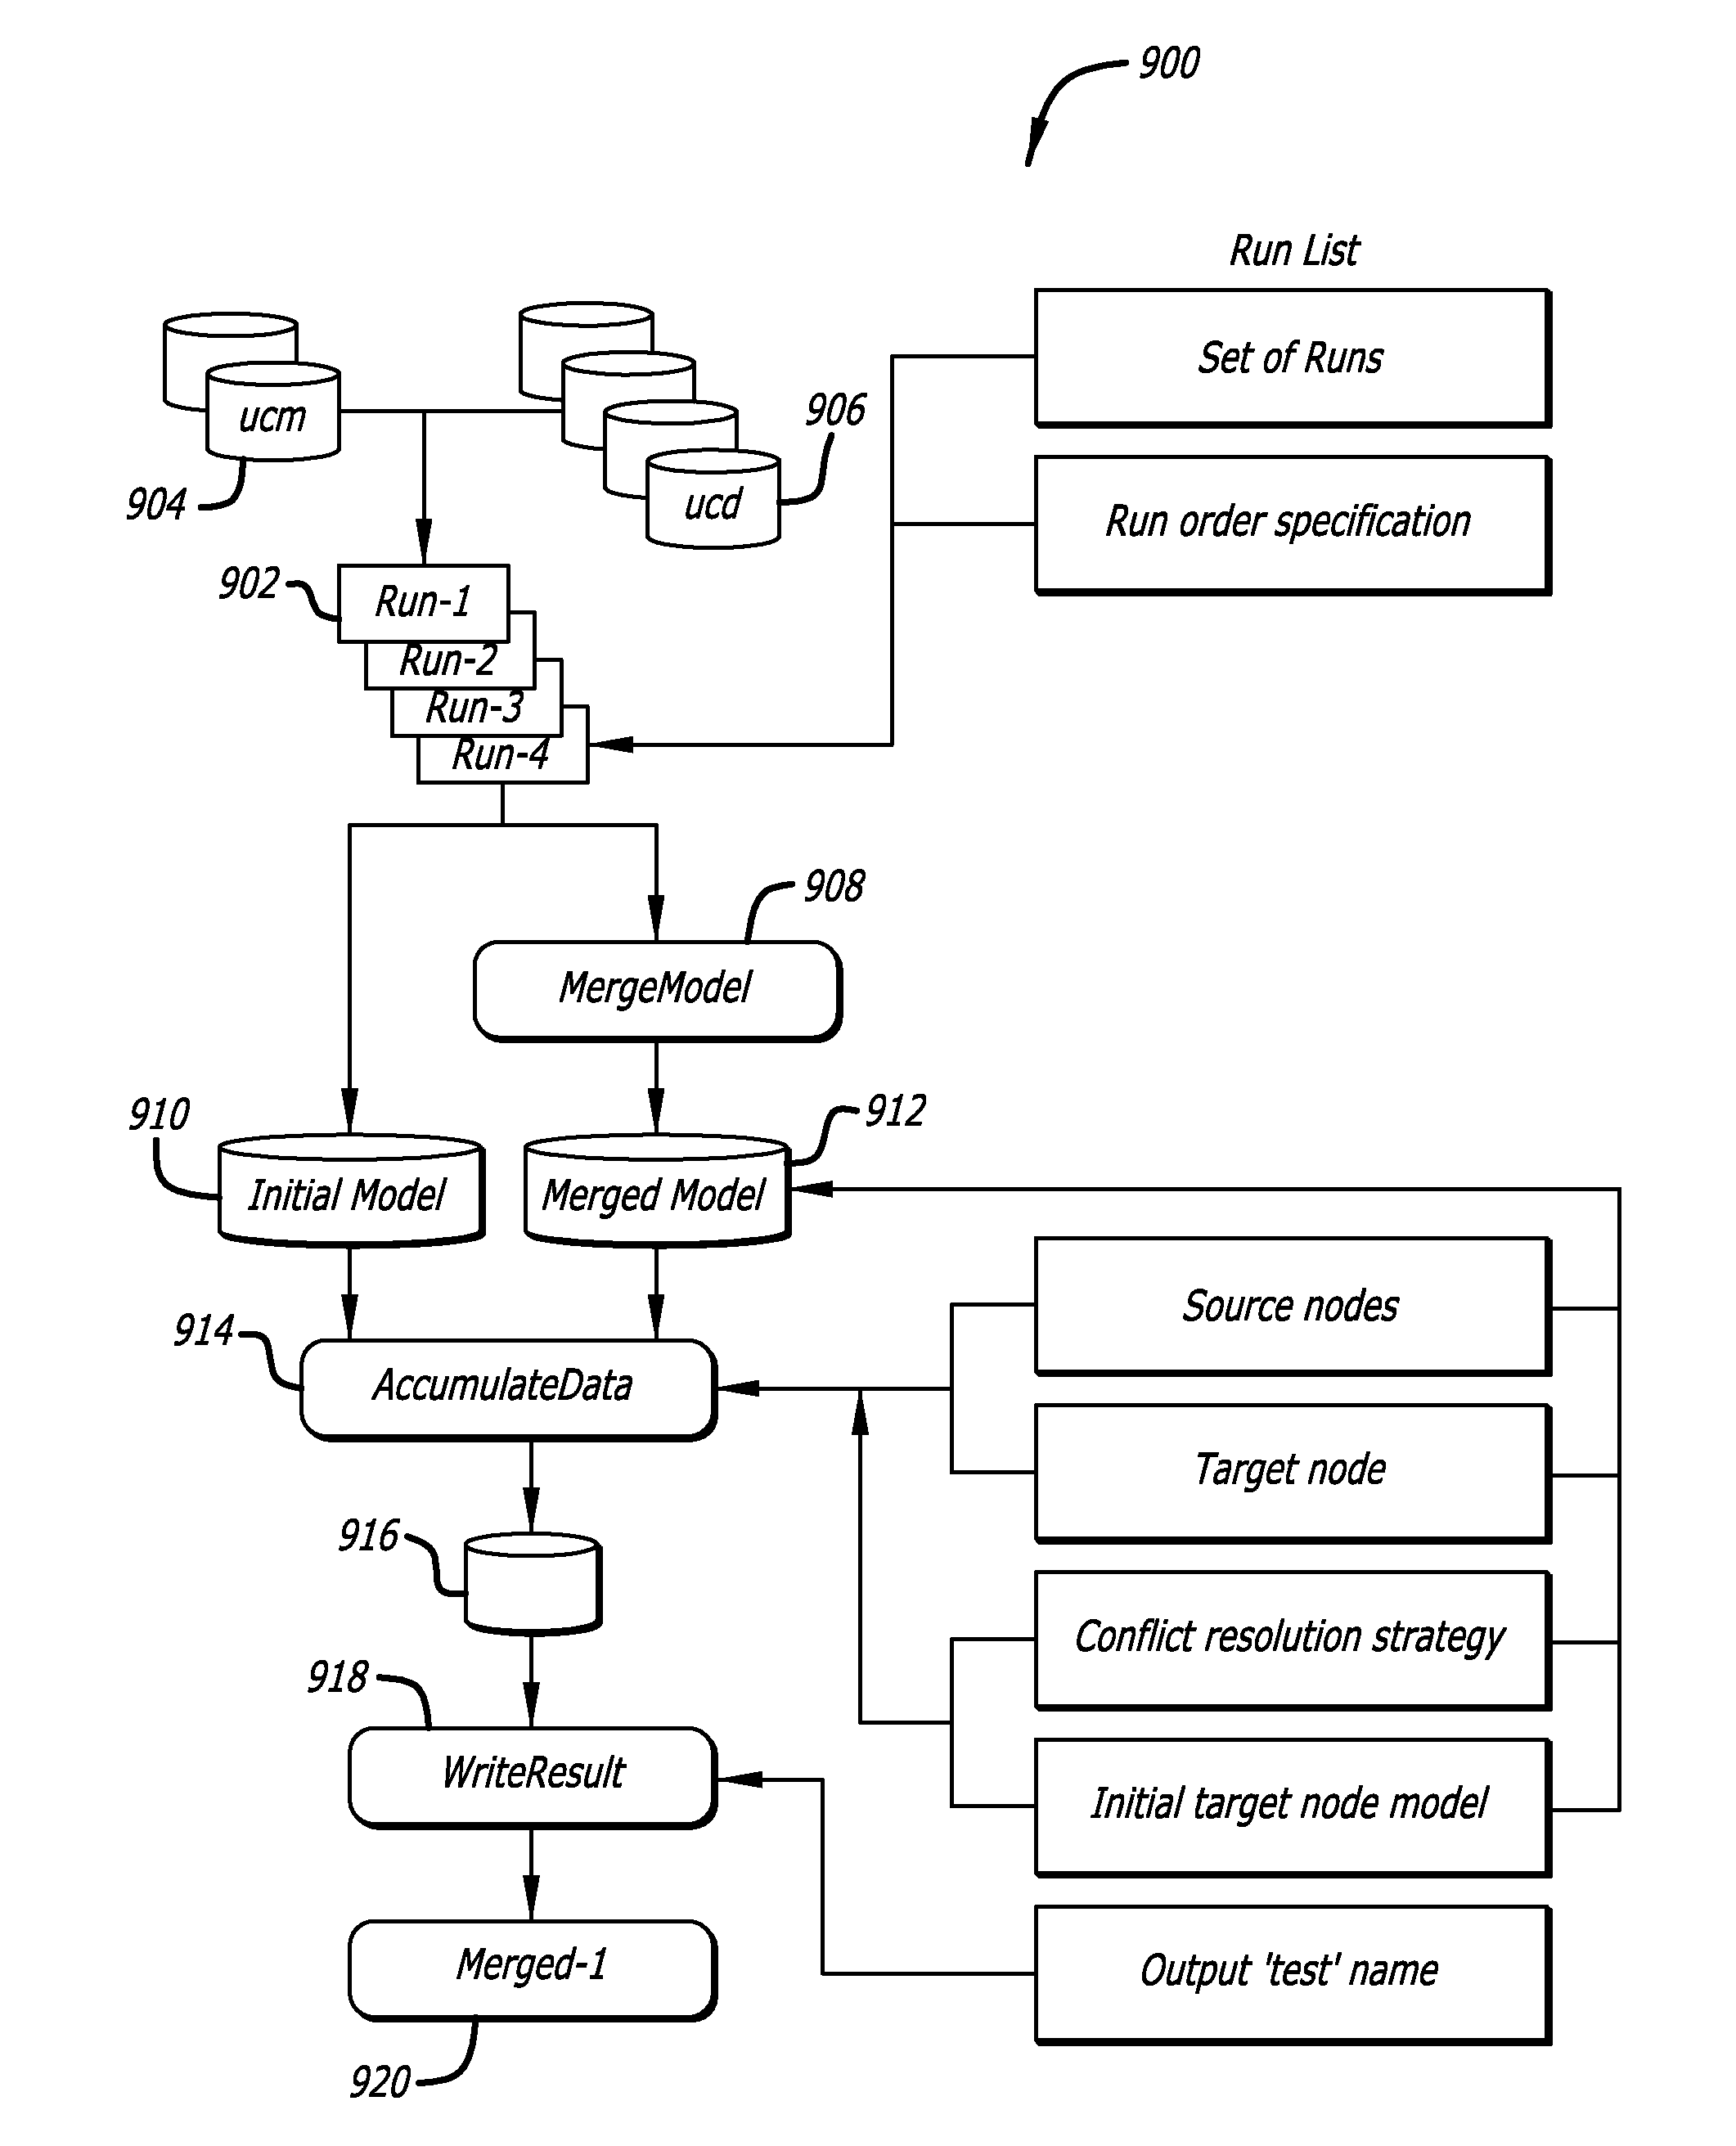 Configuration-based merging of coverage data results for functional verification of integrated circuits